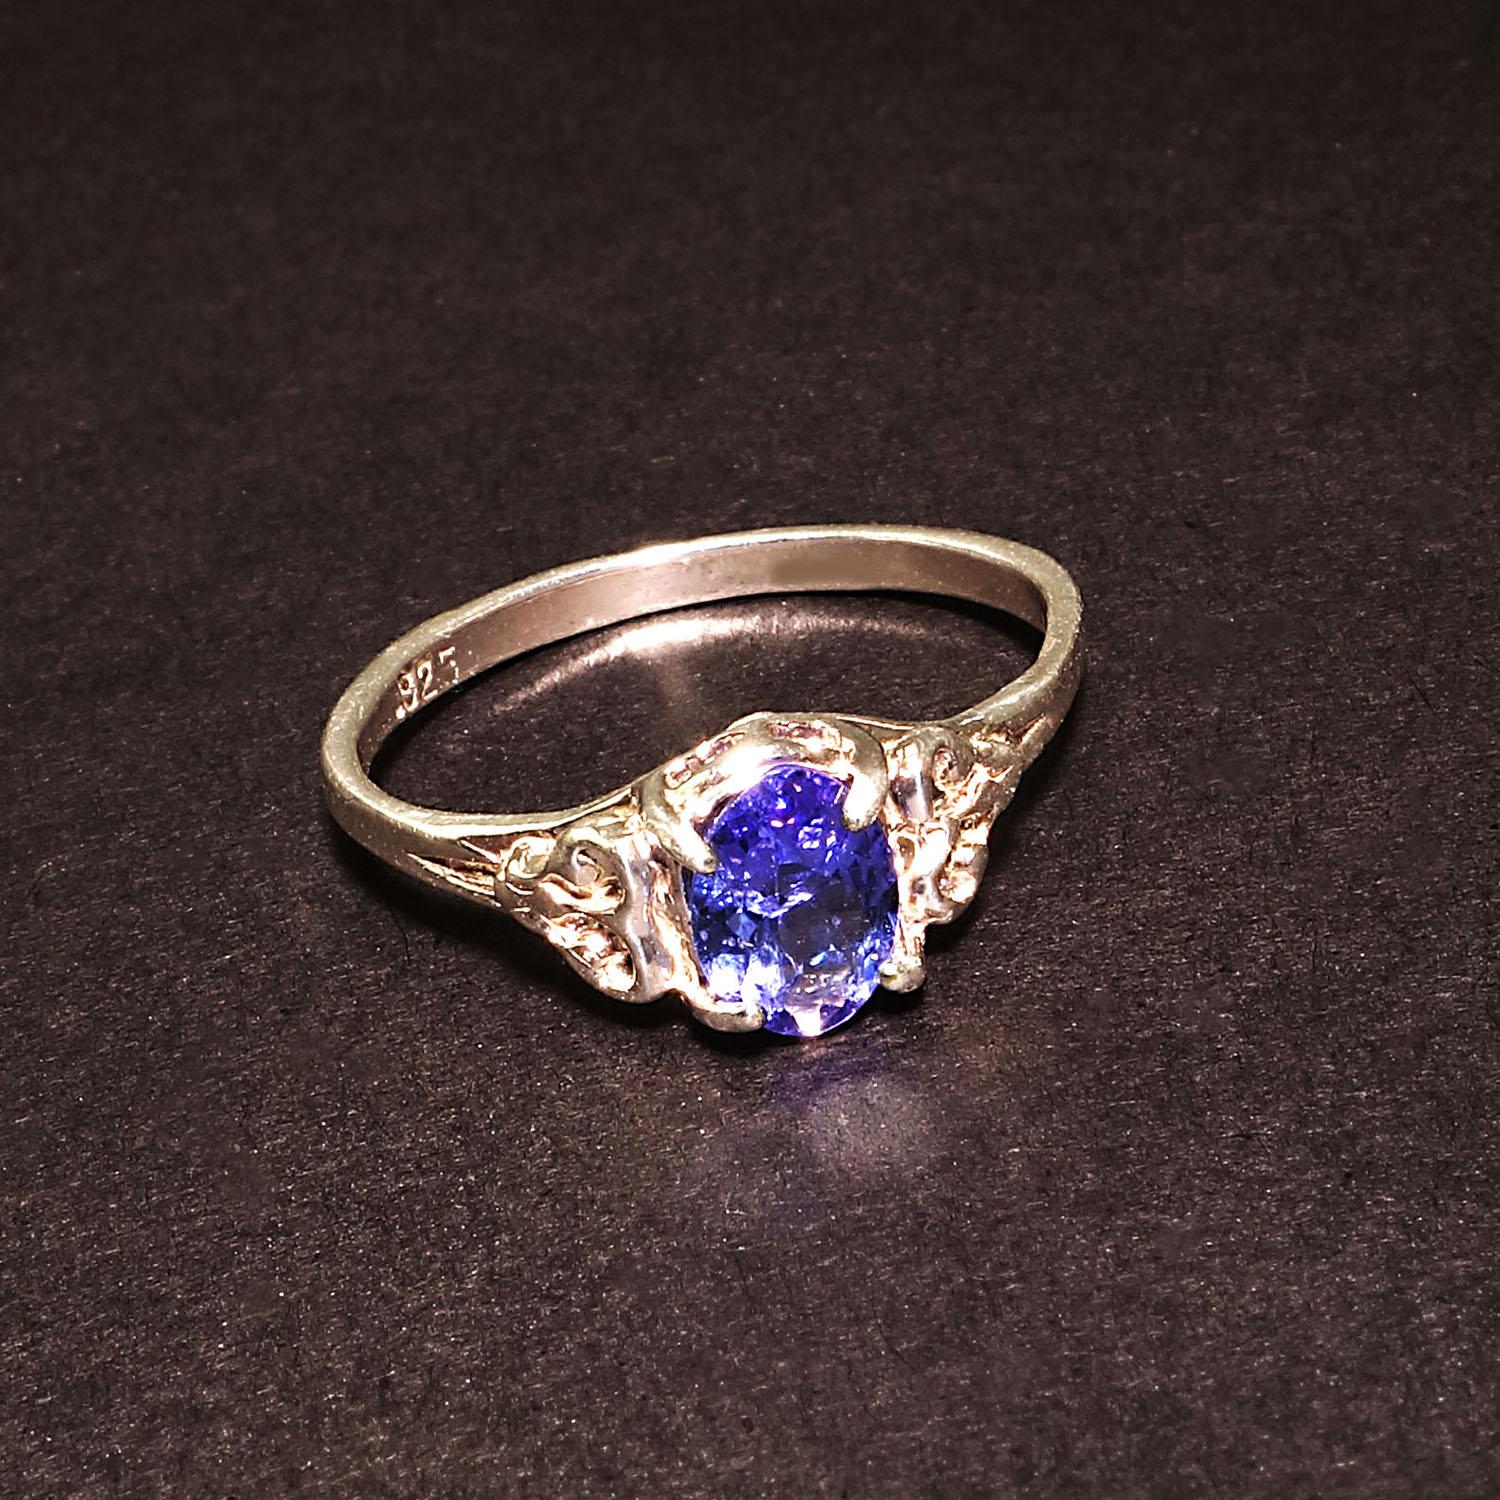 Custom designed ring featuring an oval Tanzanite nestled in a Sterling Silver setting of free form scrolly hearts and detail work descending to a single Sterling Silver band.  The detail in the setting perfectly sets off the sparkling 7x5MM